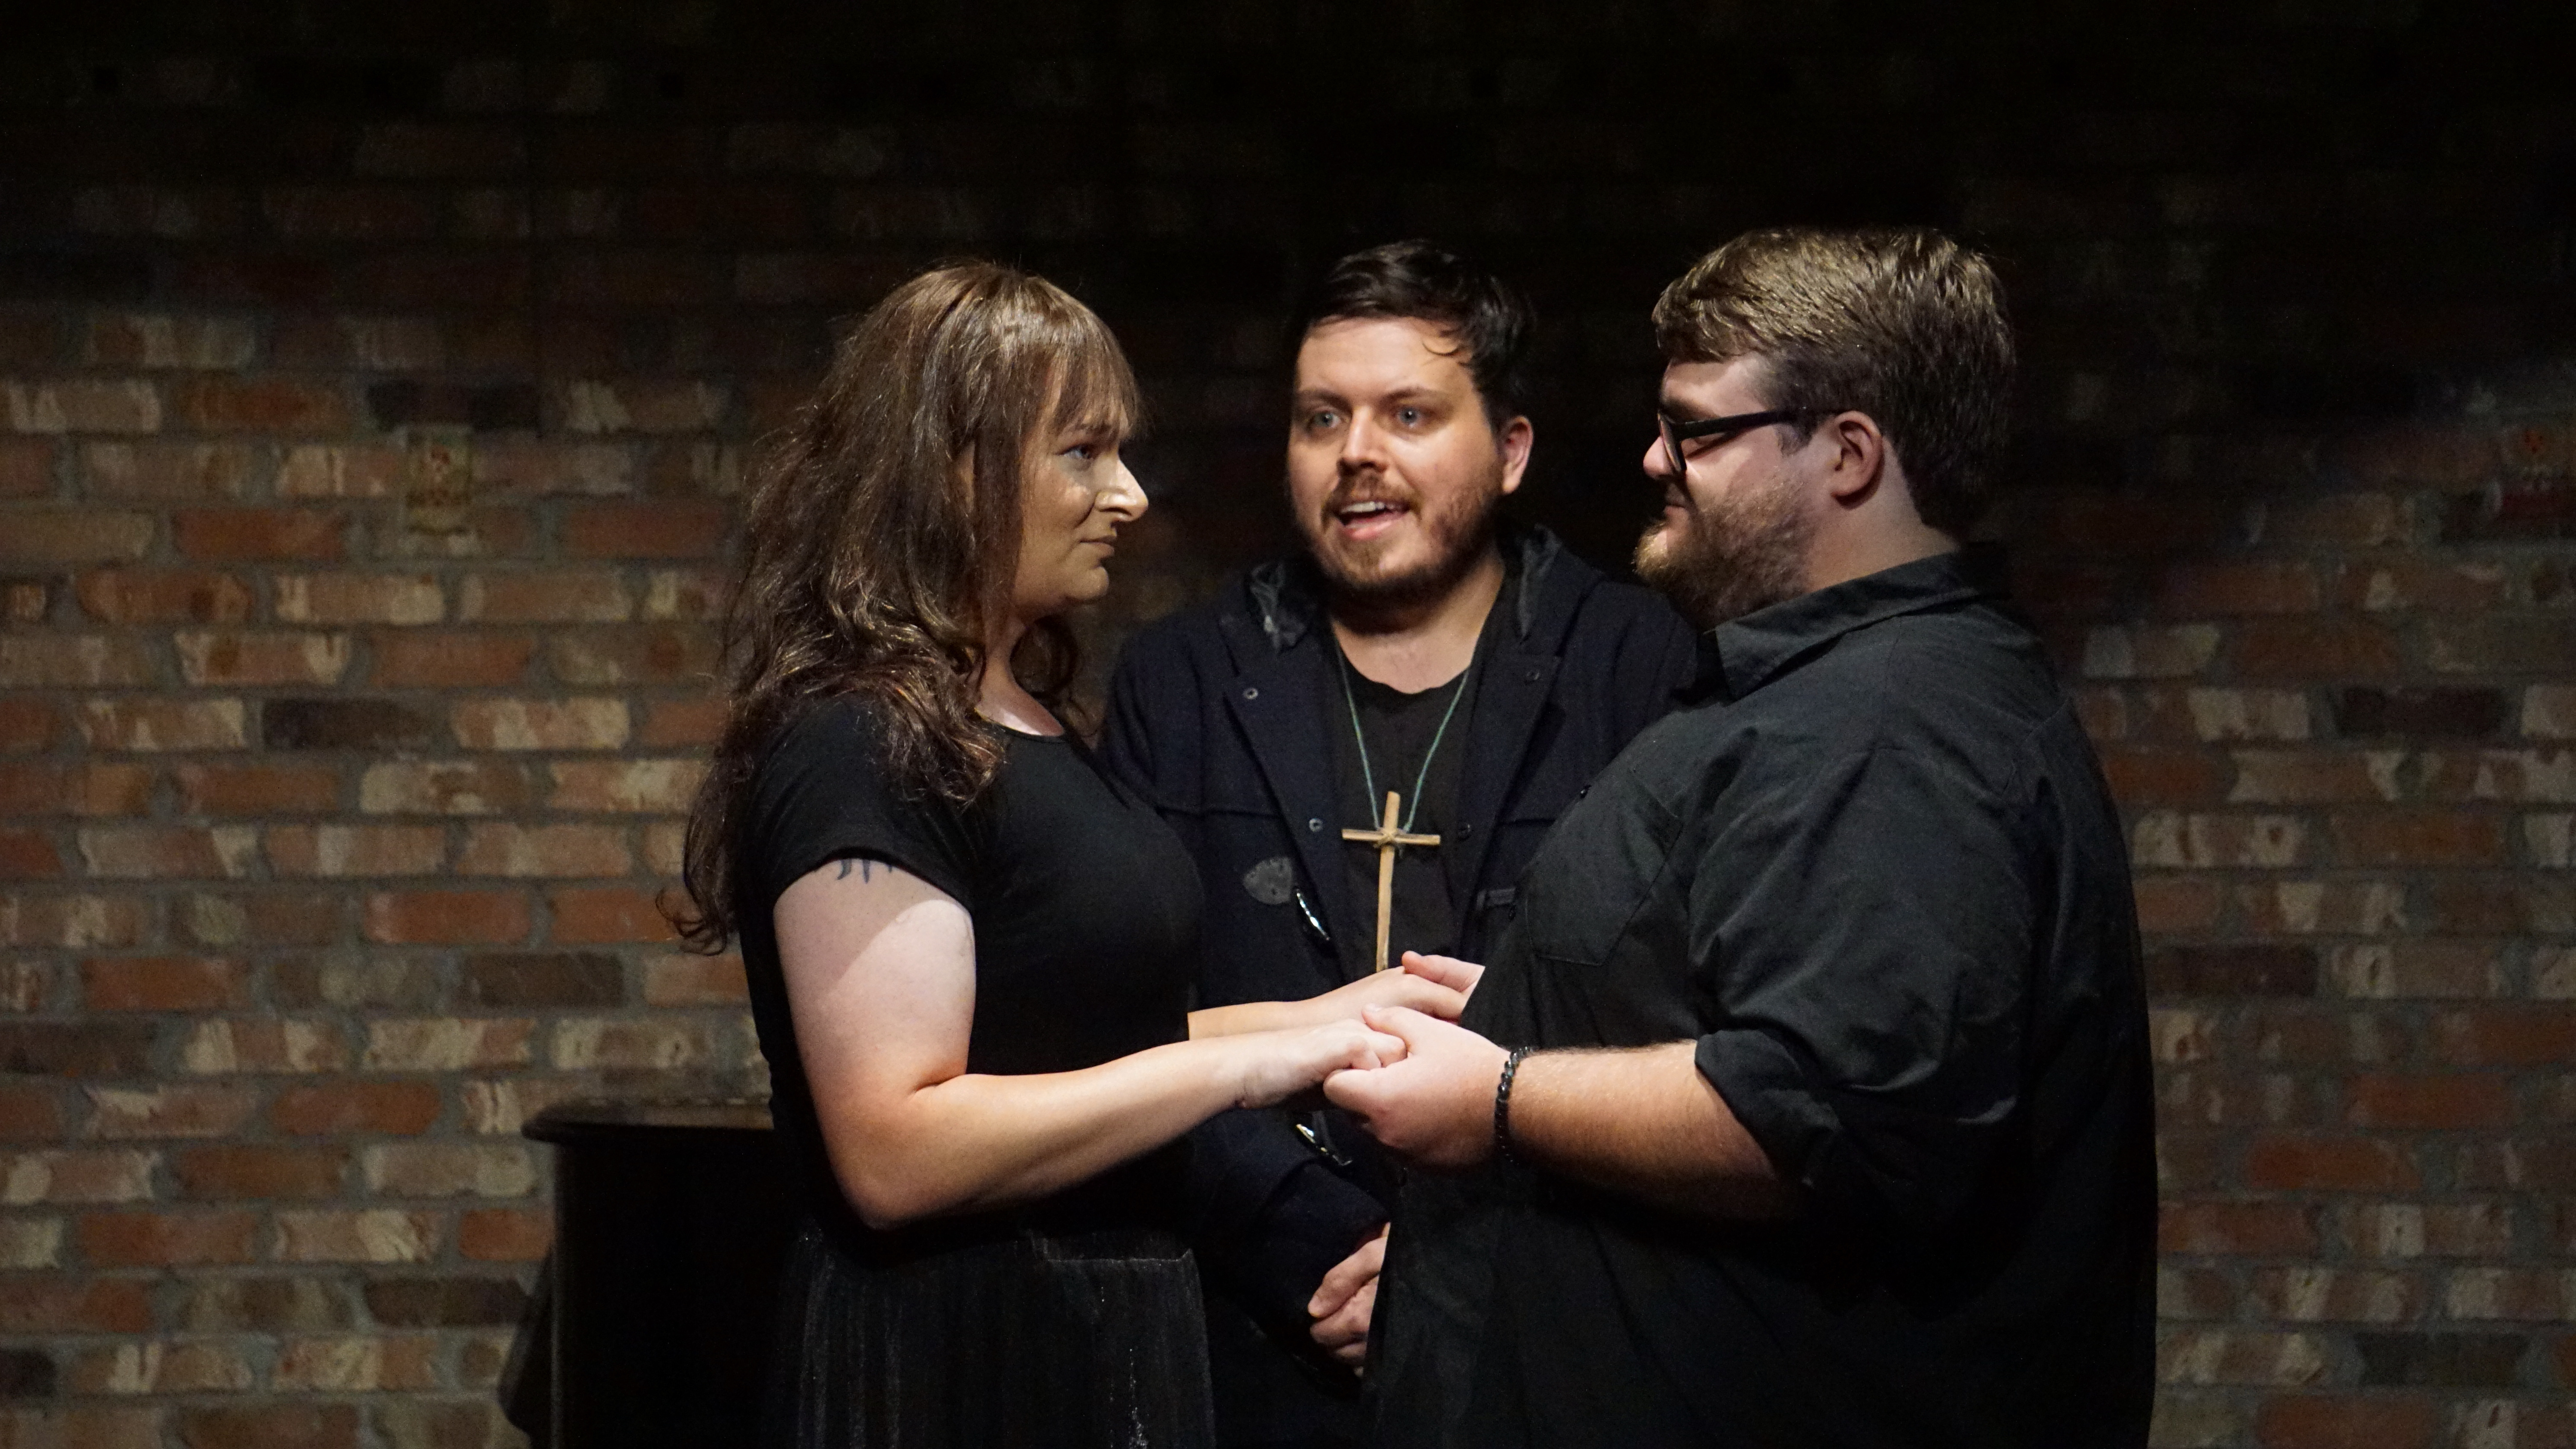 Roger the priest (Vincent Powell, center) prepares to unite Ymma (Billie Jane) and the king (Bennett Morgan) in the Lightup Shoebox production of "Silence." (Courtesy Alan Levi, Lightup Shoebox)